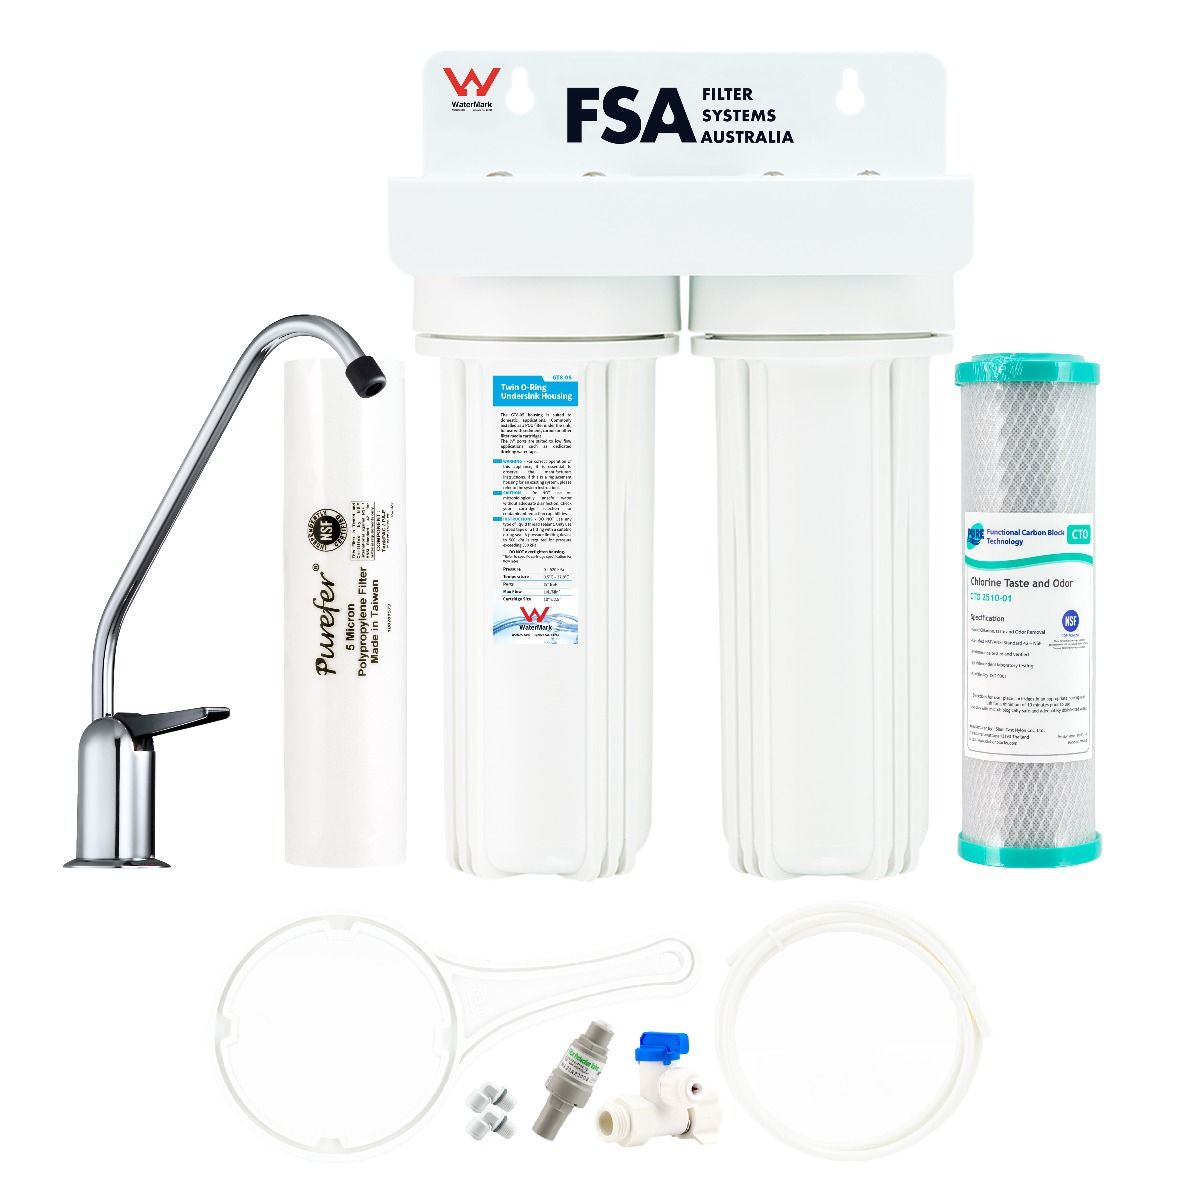 Know the facts about Water Filters in Australia